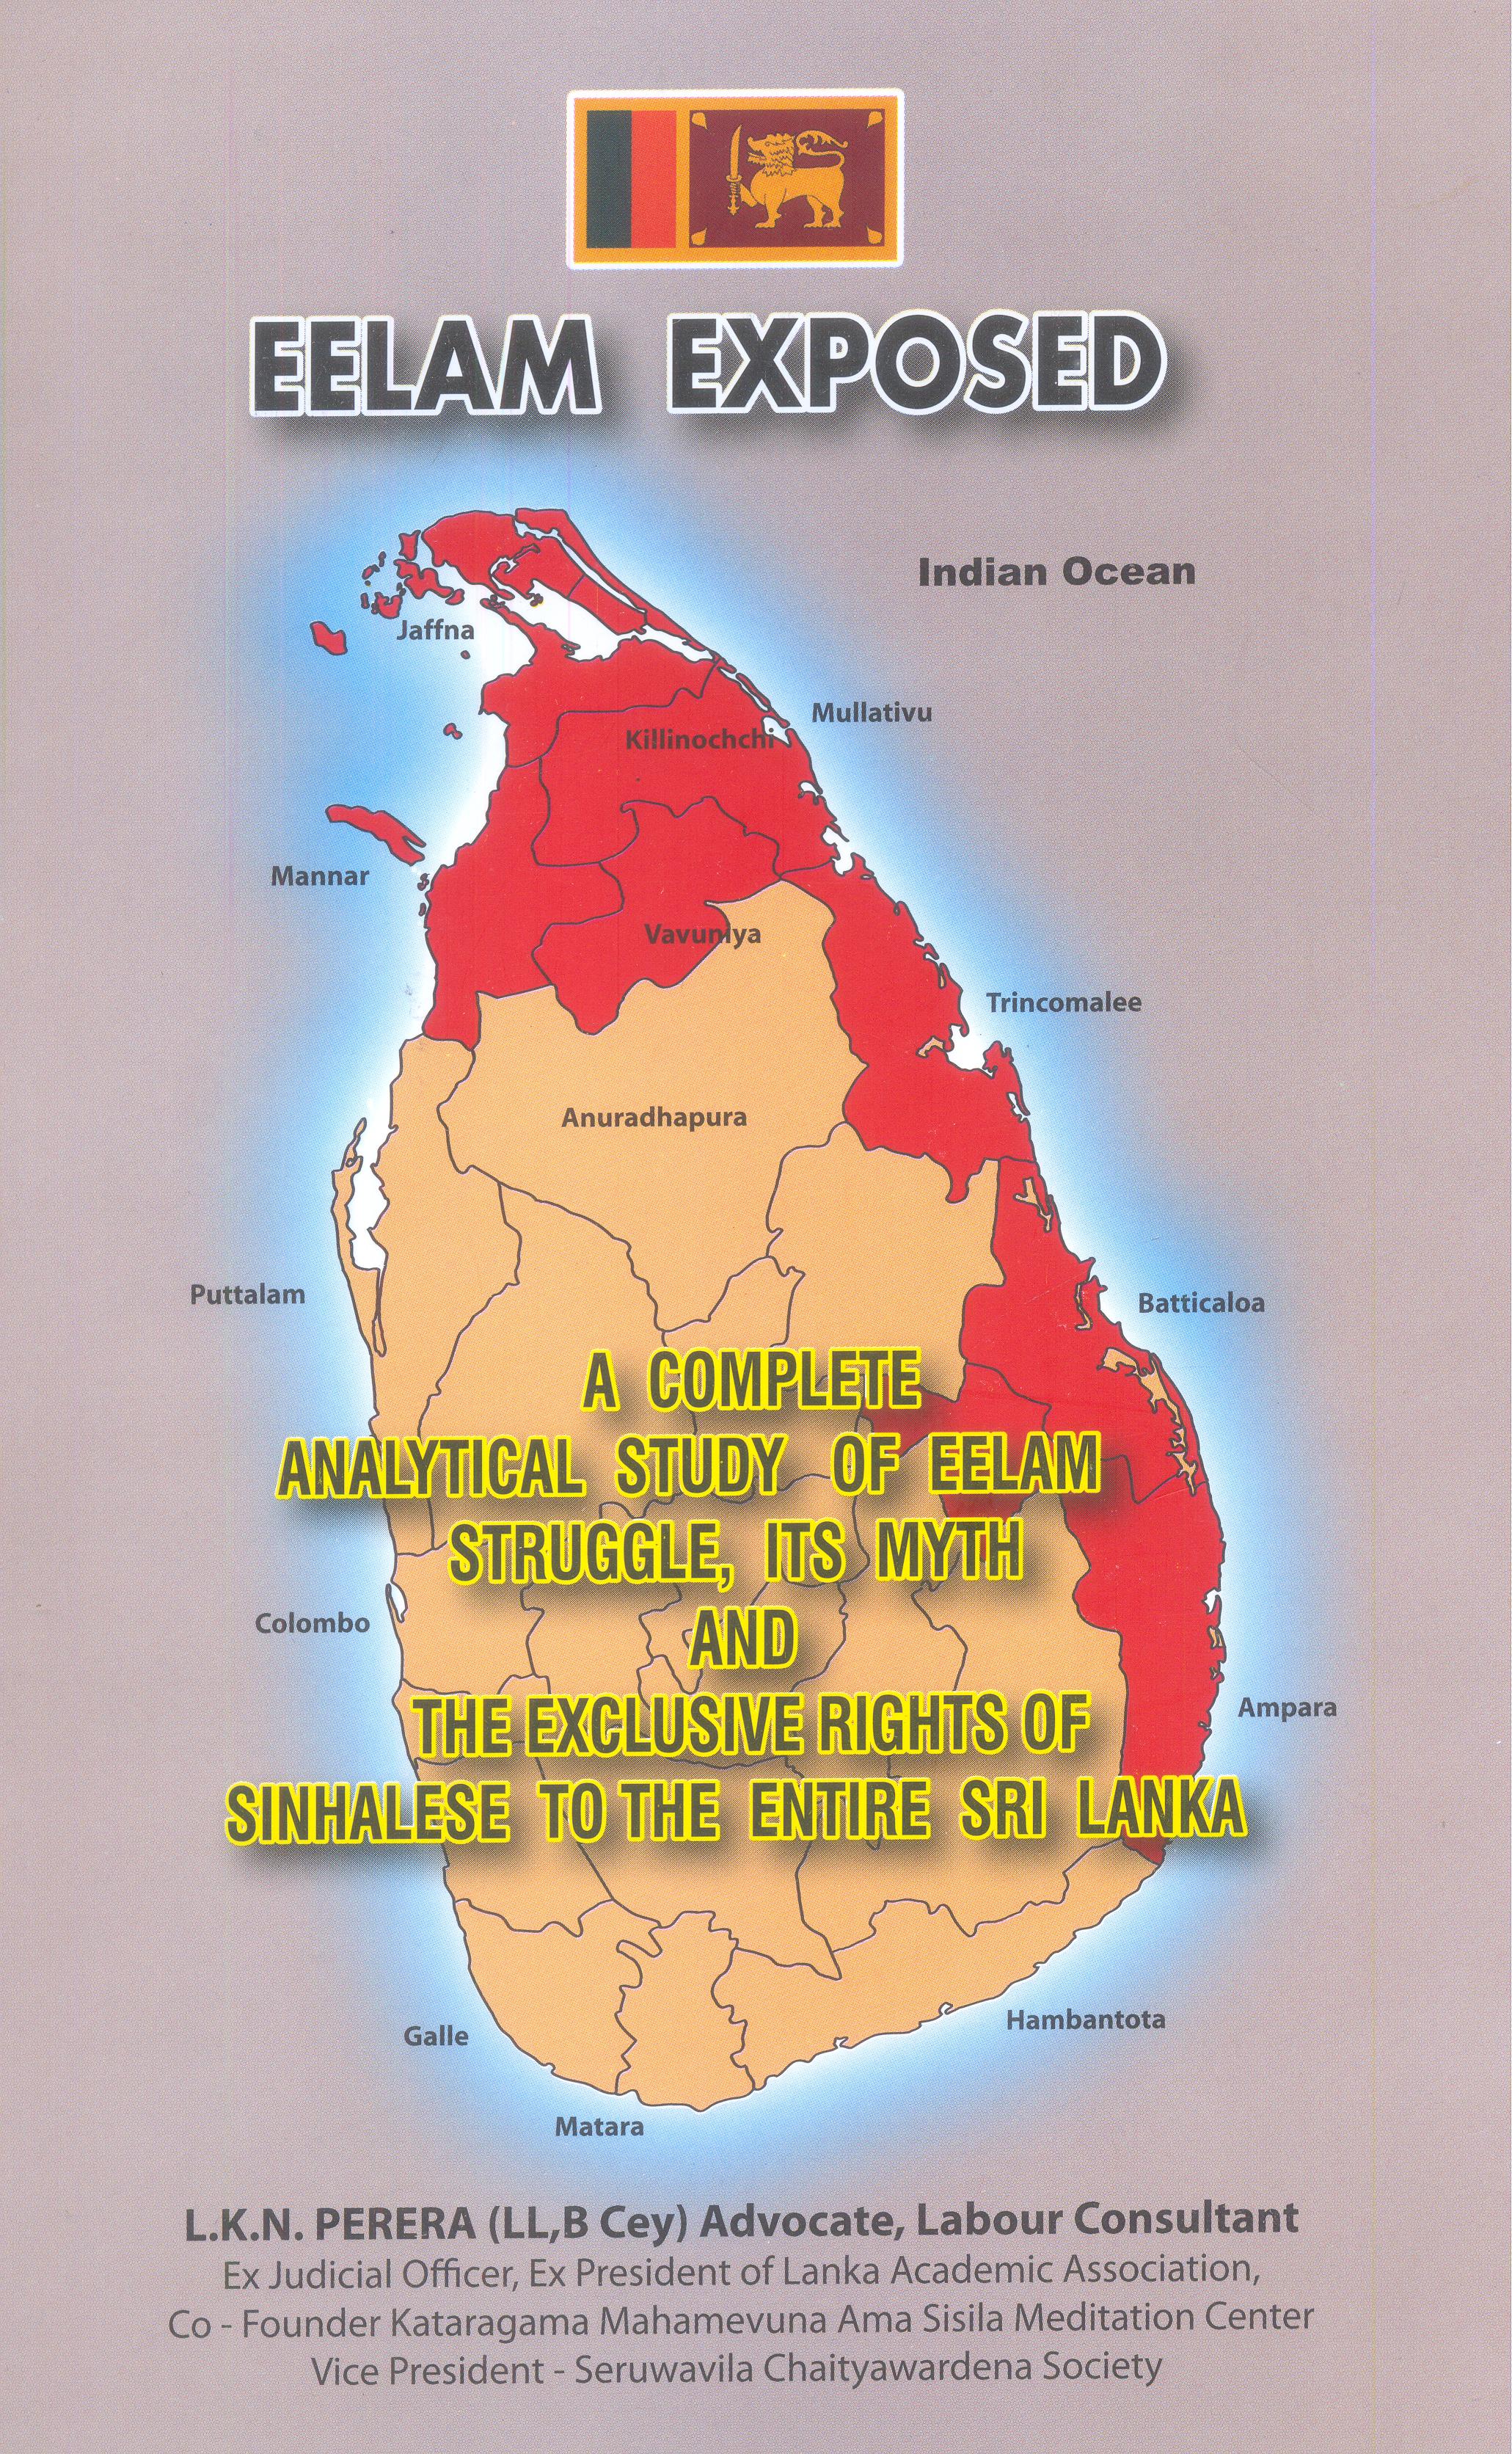 Eelam Exposed - A Complete Analytical Study Of Eelam Struggle, Its Myth And The Exclusive Rights (H/B)